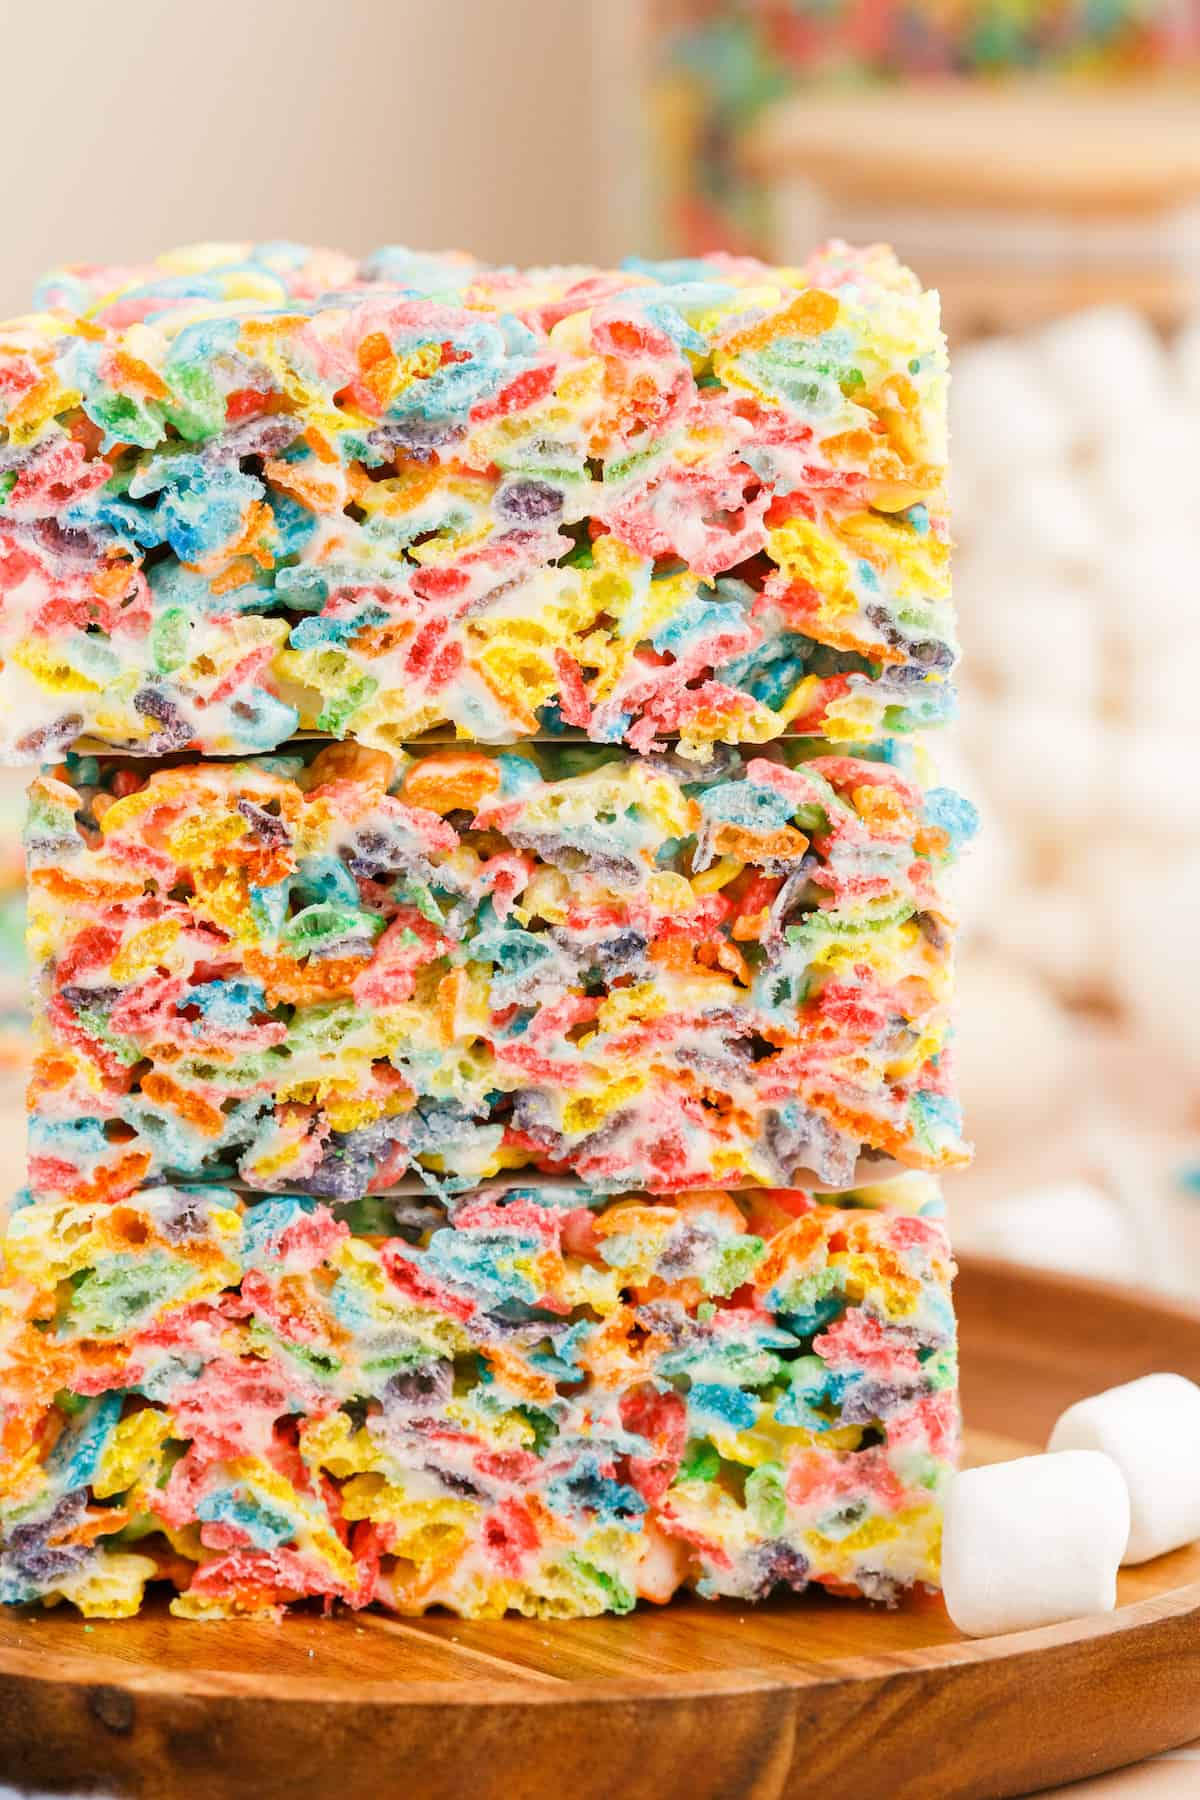 A close up of rainbow colored rice krispie treats with fruity pebbles cereal.